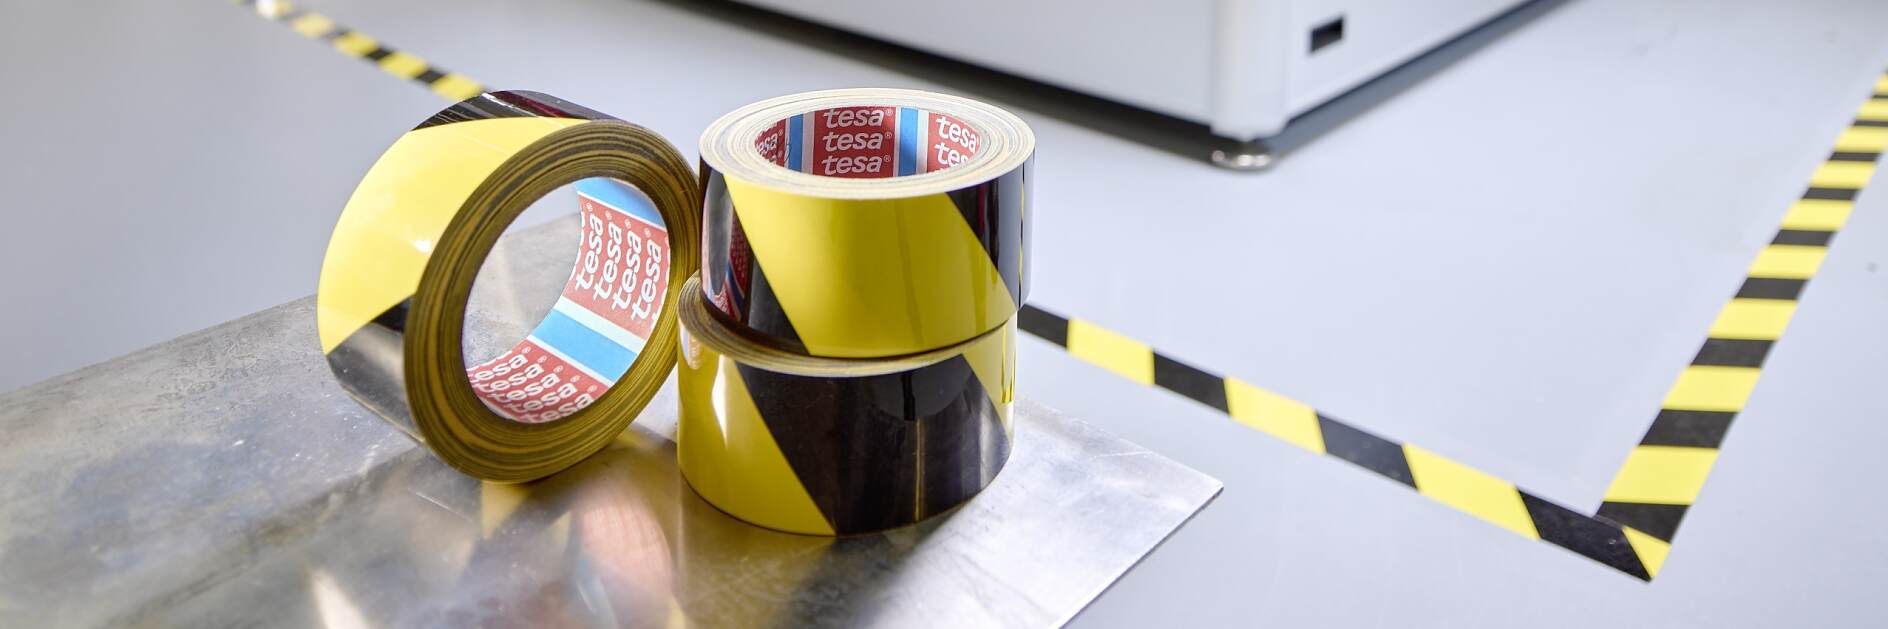 Double Sided Tape - Satelite Group